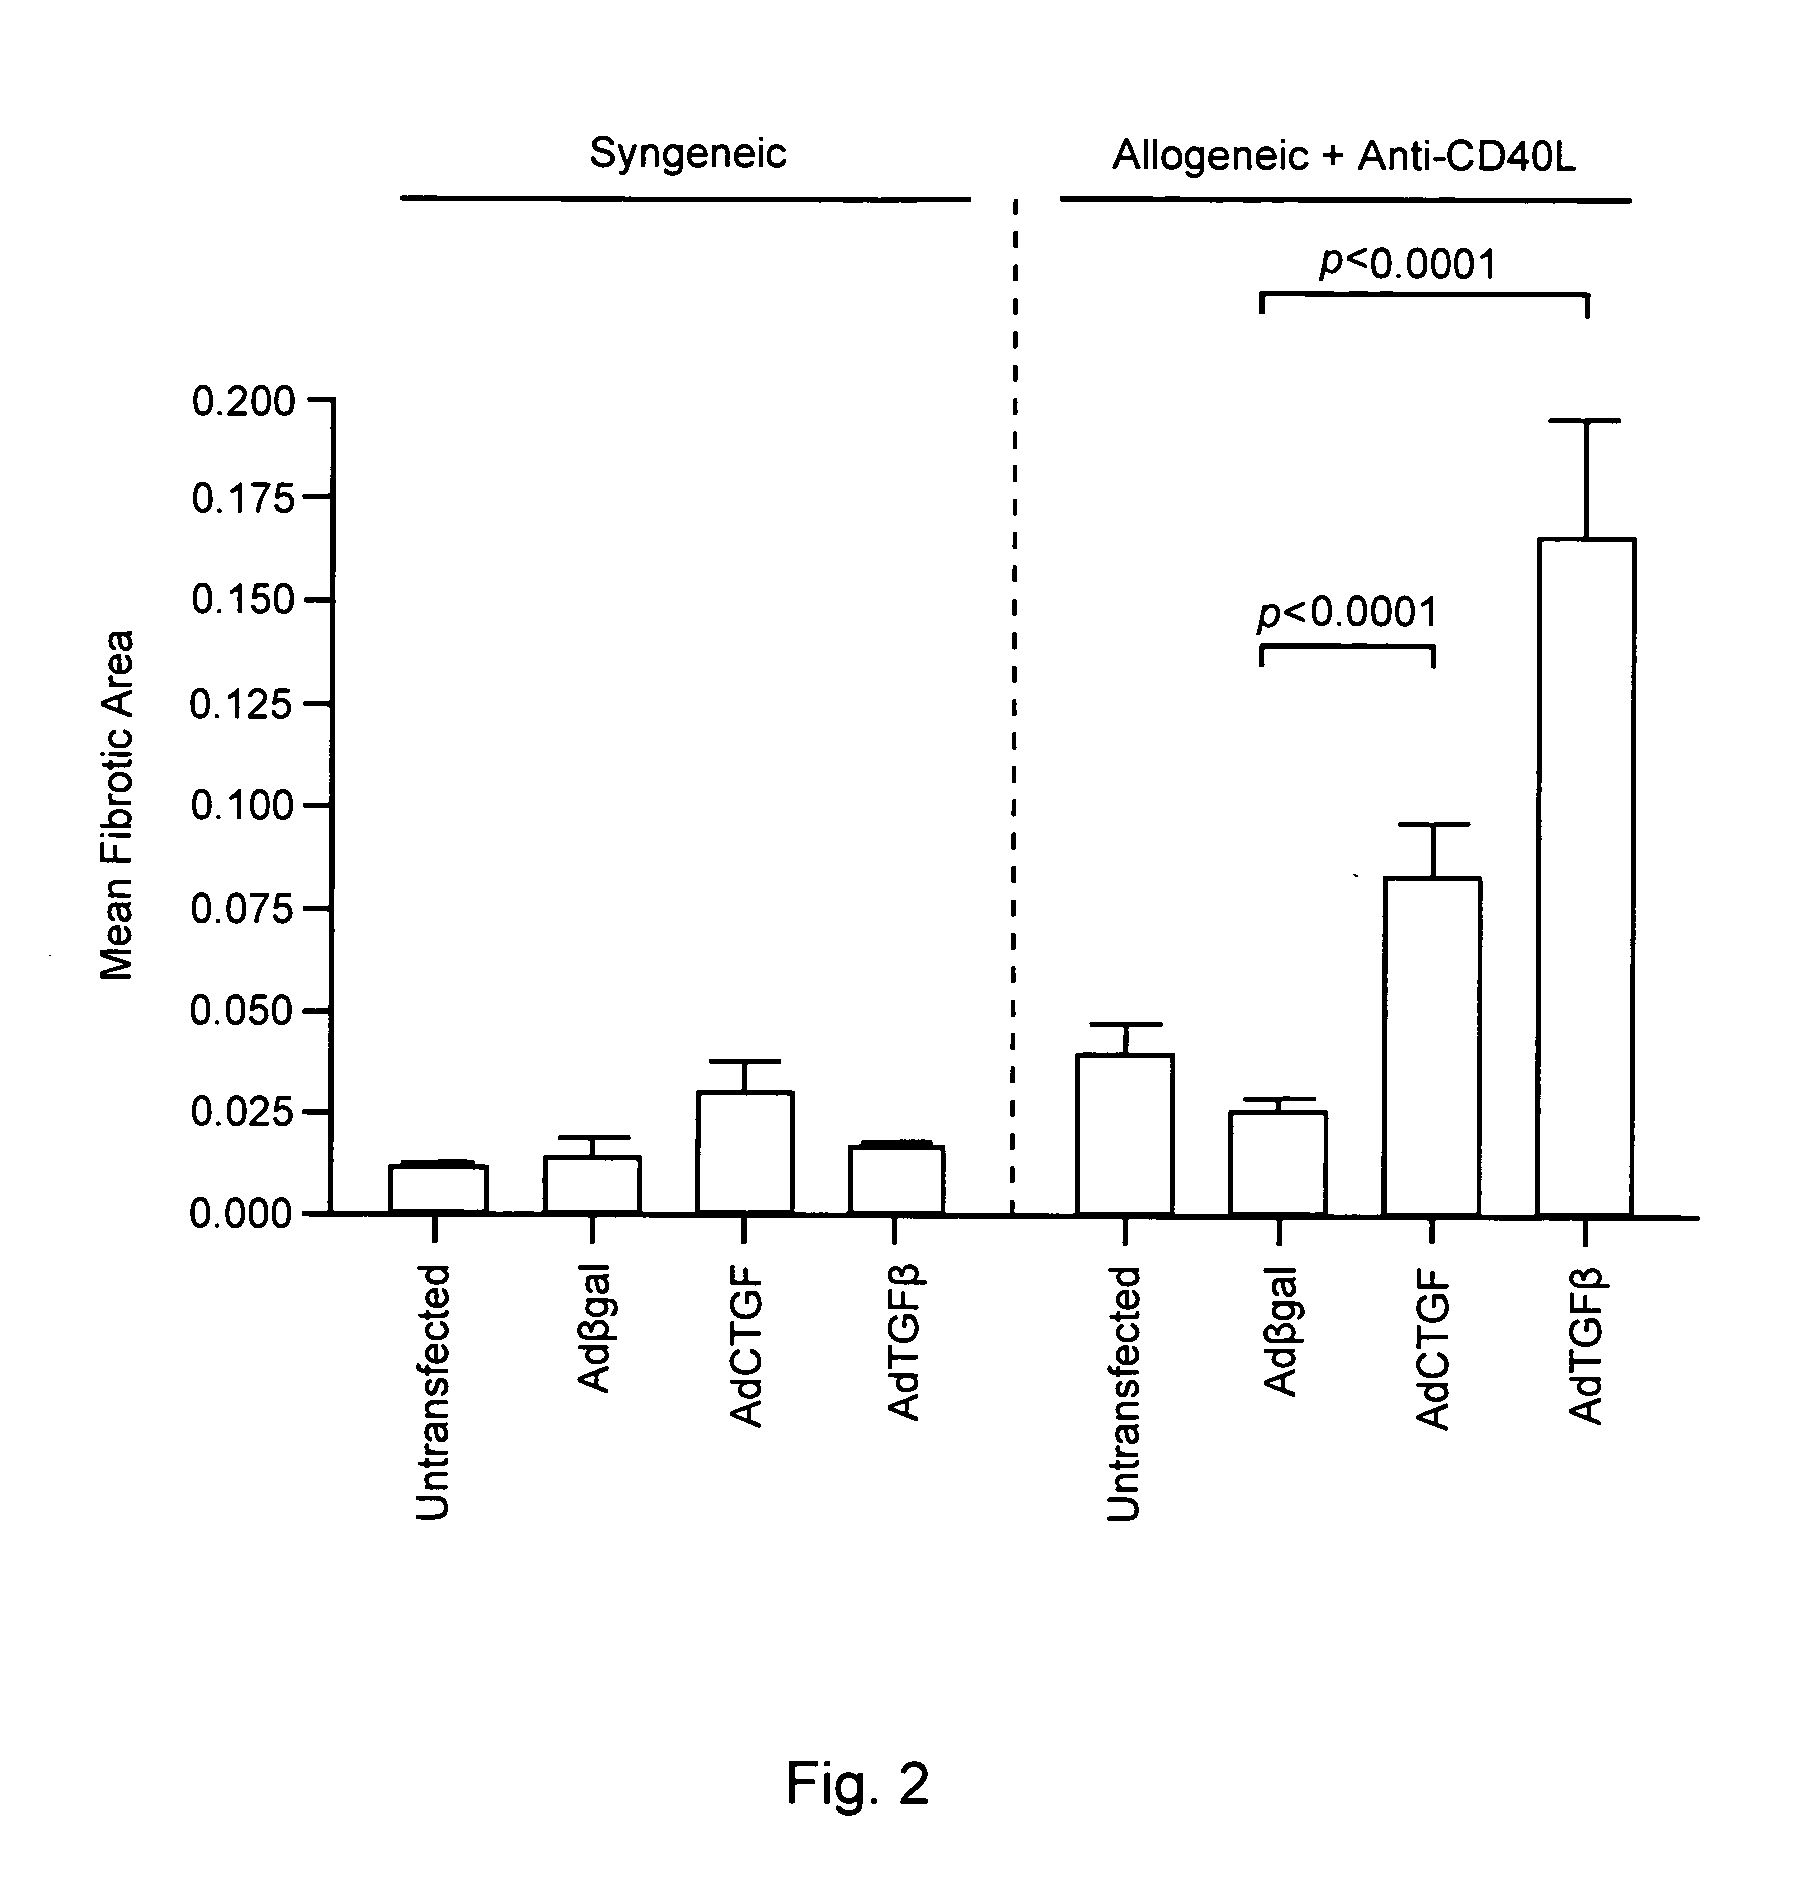 Compound and method for treatment of chronic transplant rejection